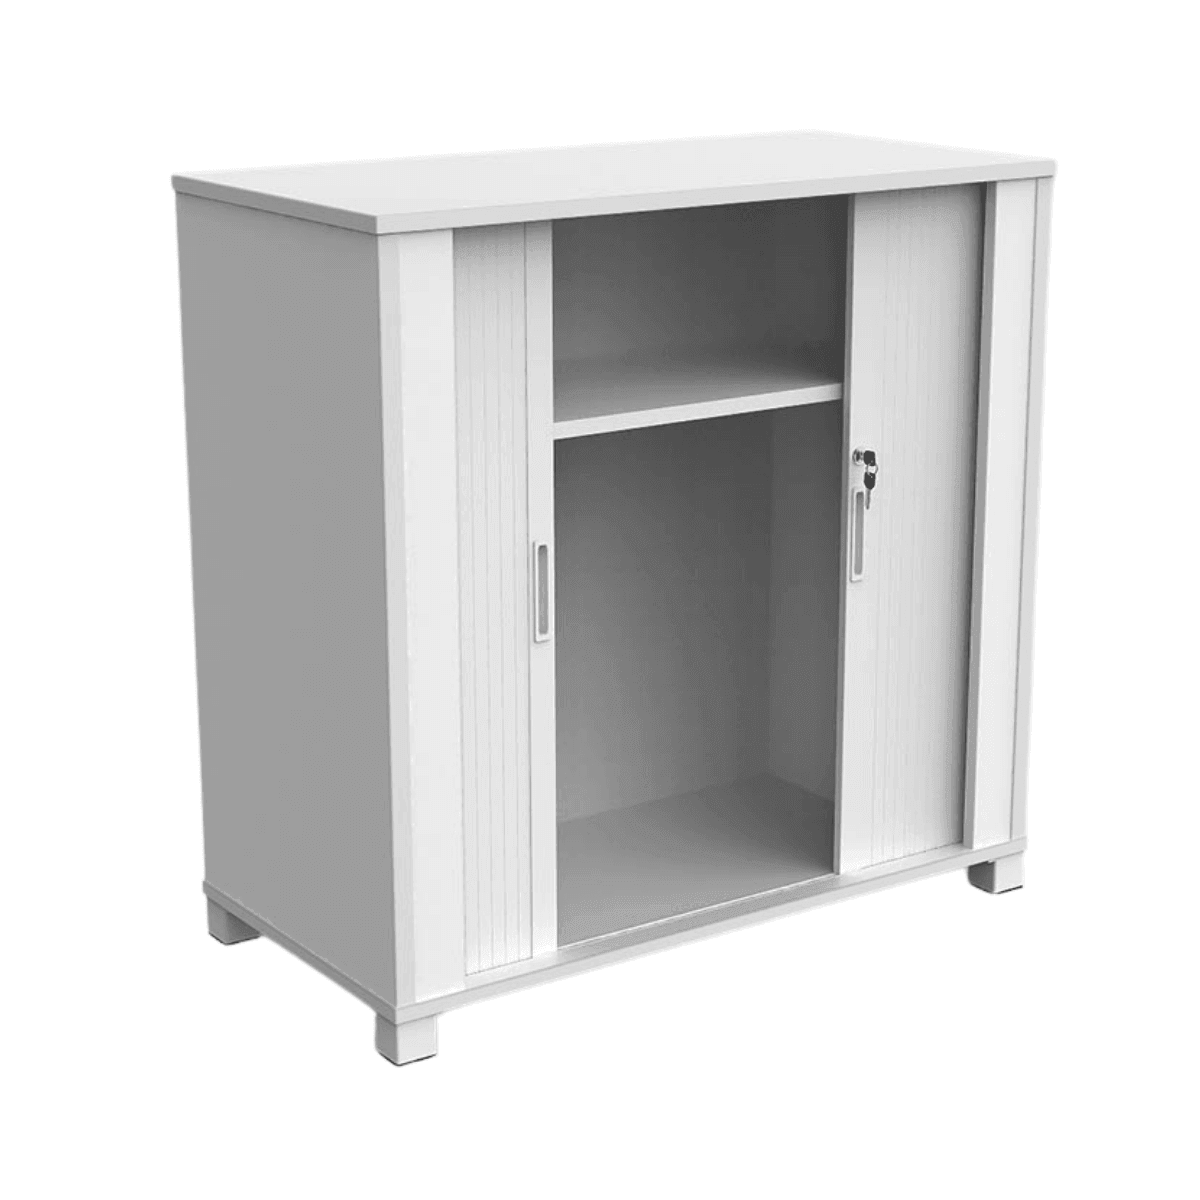 Axis Tambour Storage Cabinet - Office Furniture Company 